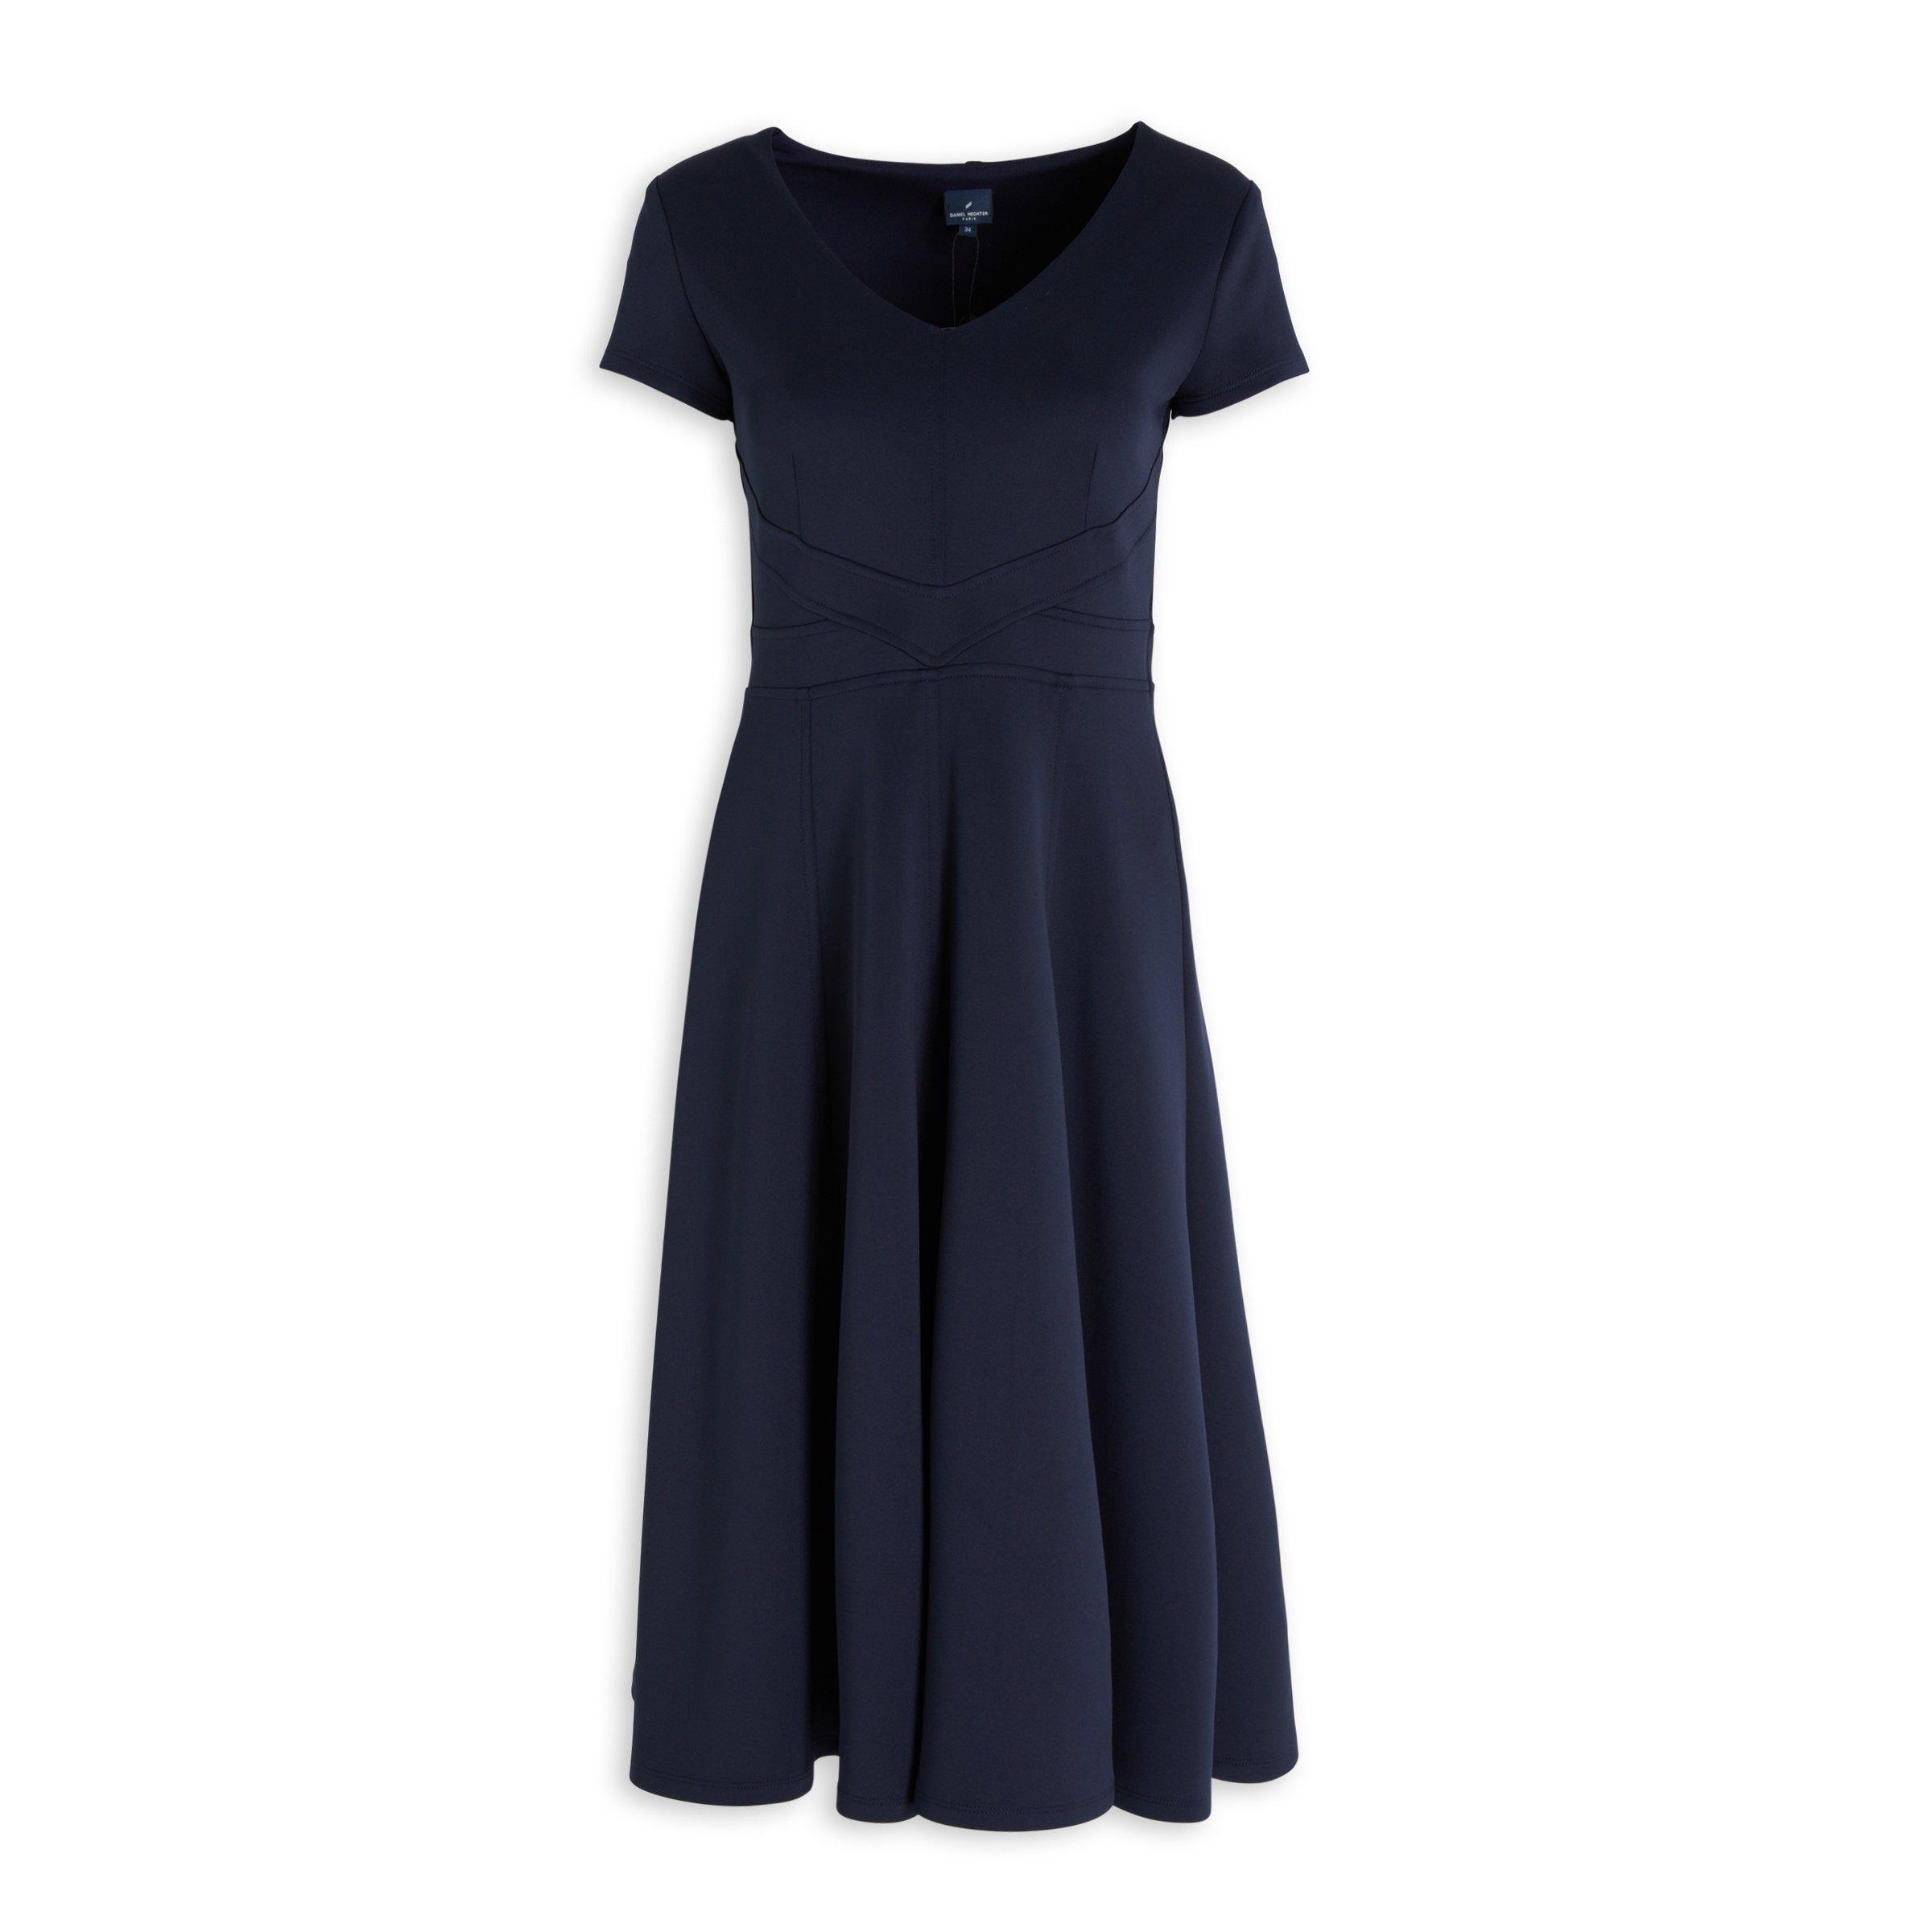 Navy fit and flare dress, ERRE, Made n South Africa